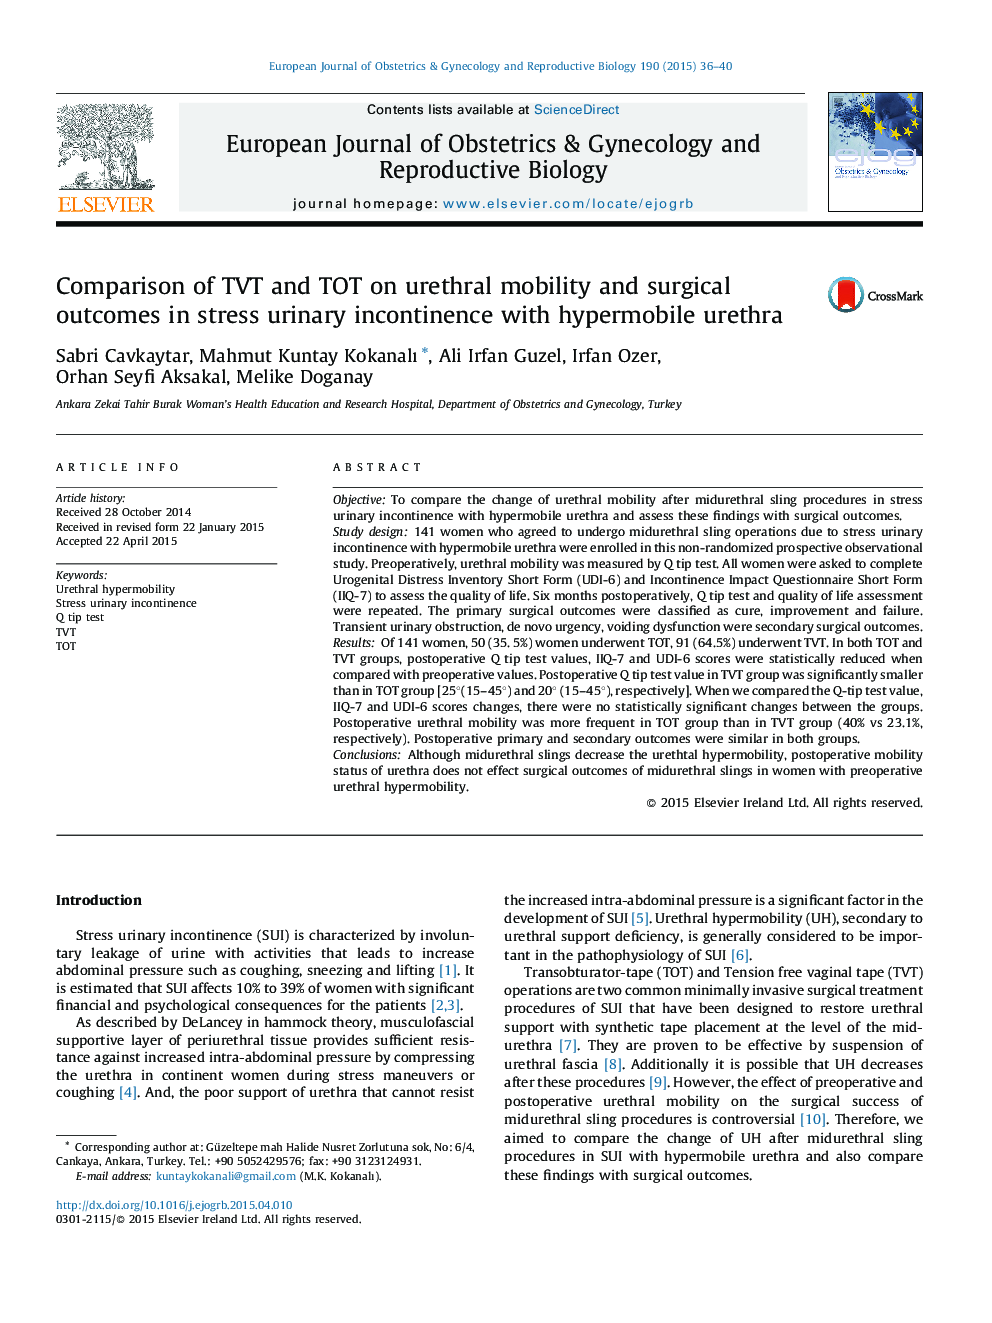 Comparison of TVT and TOT on urethral mobility and surgical outcomes in stress urinary incontinence with hypermobile urethra